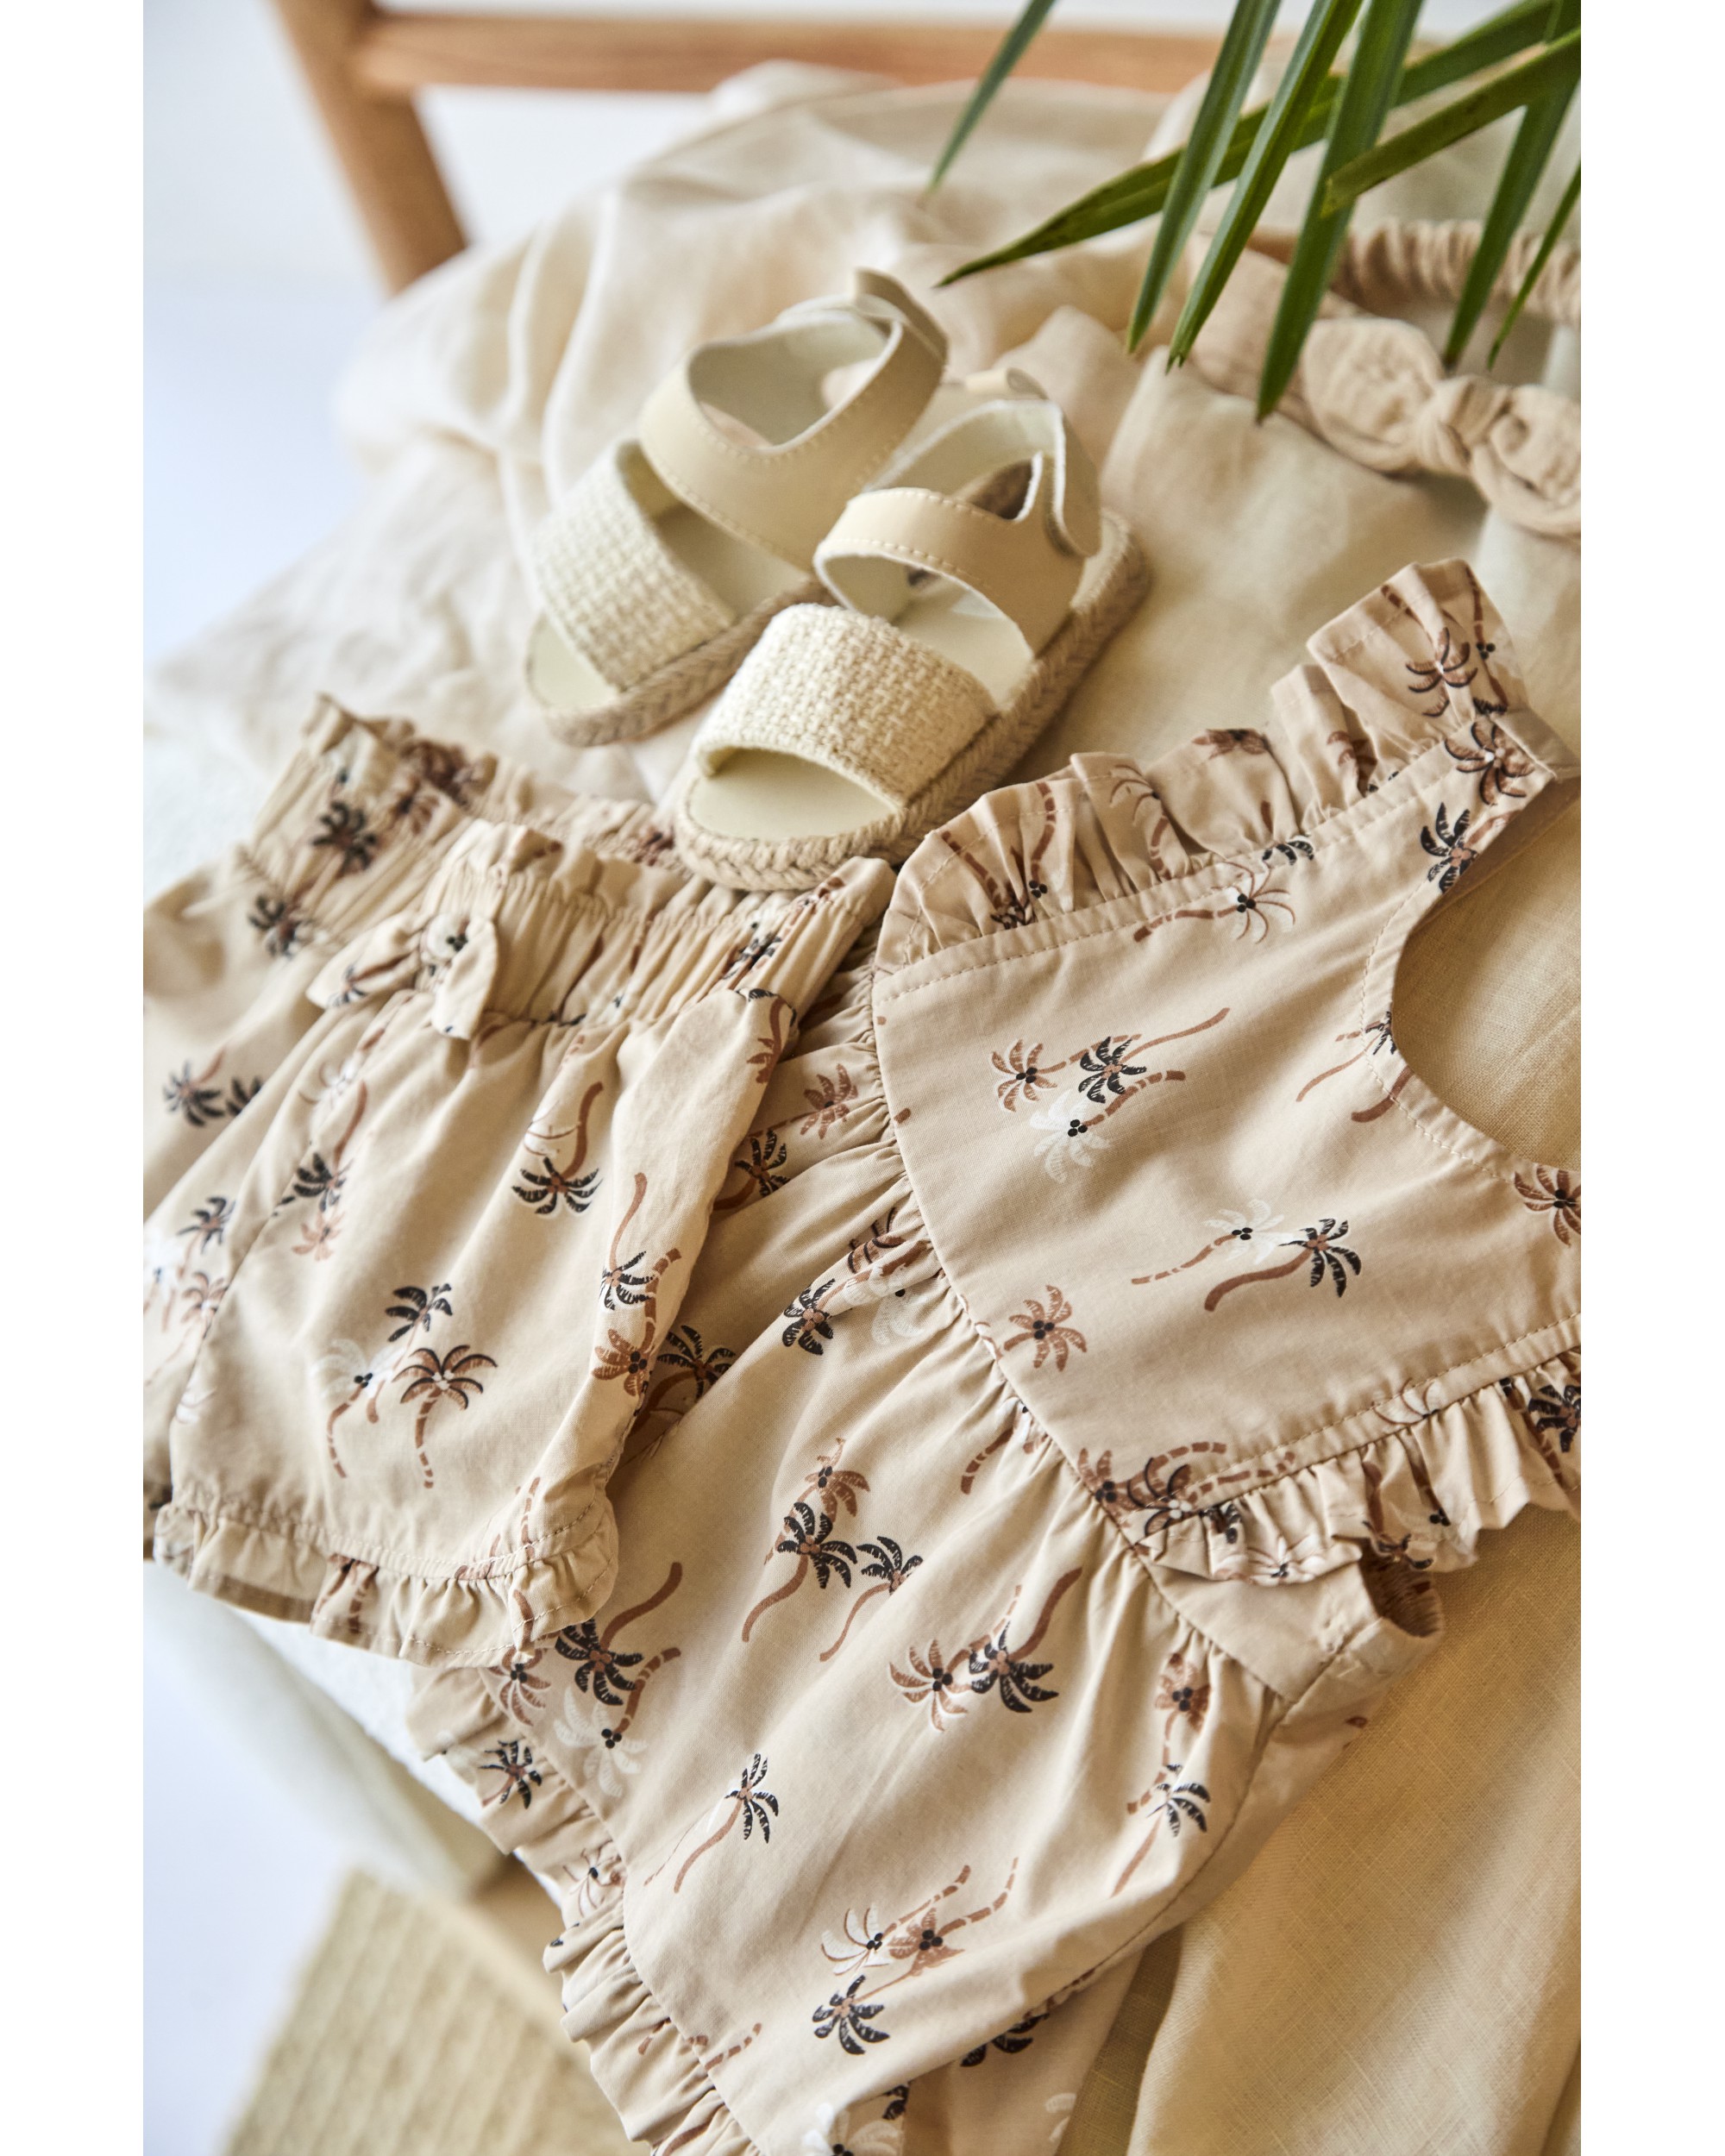 Baby 3-Piece Palm Tree Outfit Set